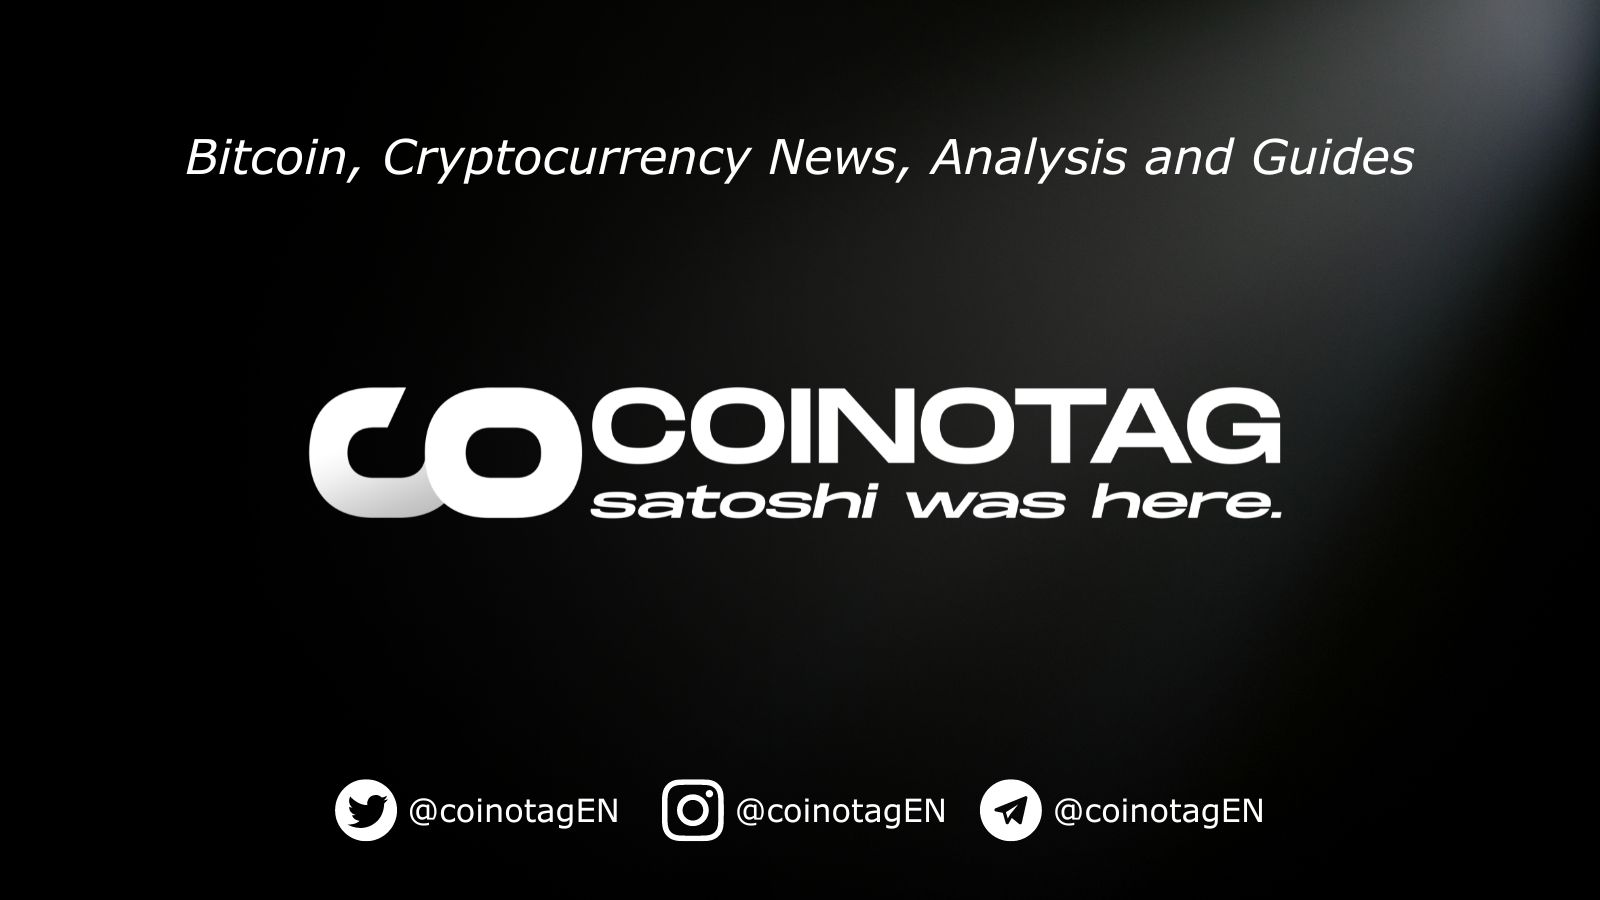 Before you reading,Don`t miss coins like PEPE again! Click here to find new PEPEs! OpenAI’s absence in China has paved the way for a new wave of Chinese AI startups, each aiming to establish themselves as leaders in the generative AI space. Backed by major reg... Read the full article for FREE at COINOTAG!